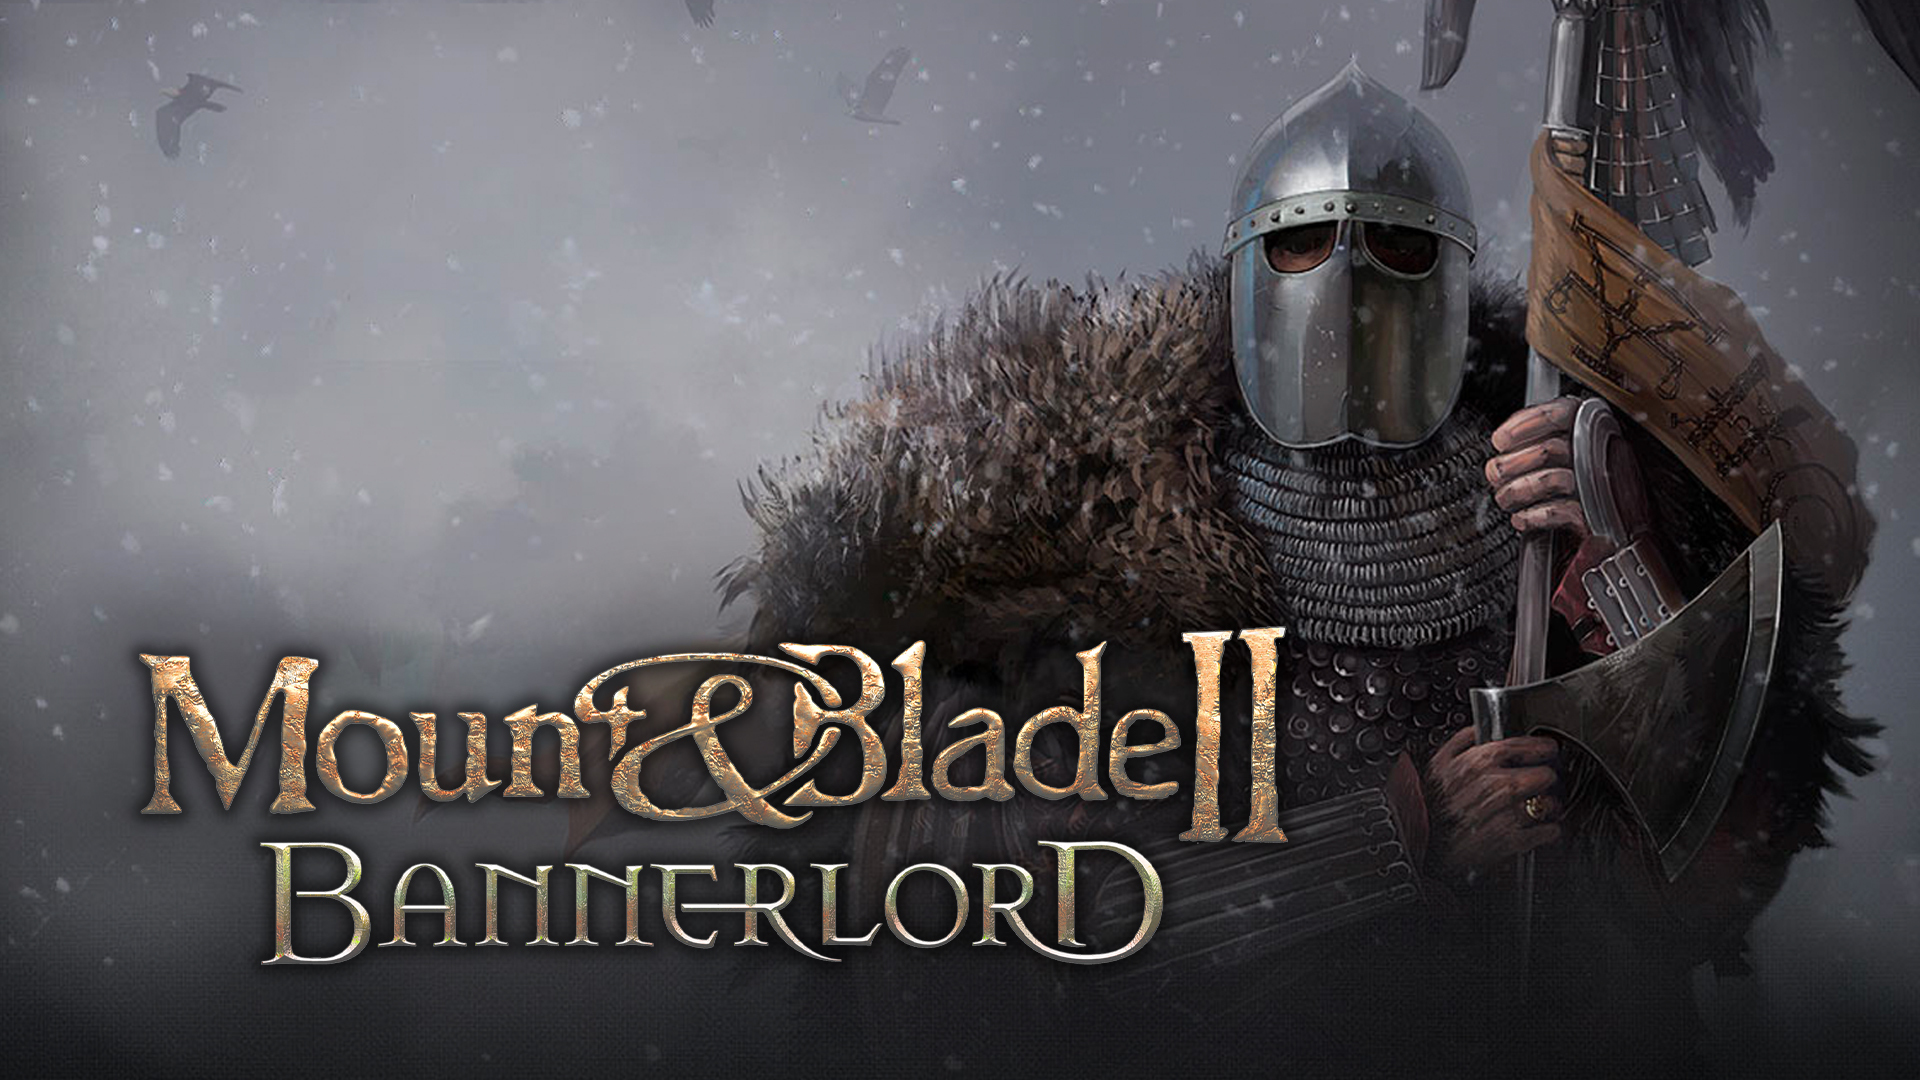 Mount and blade 2 Free PC Edition Working Game Free Download 